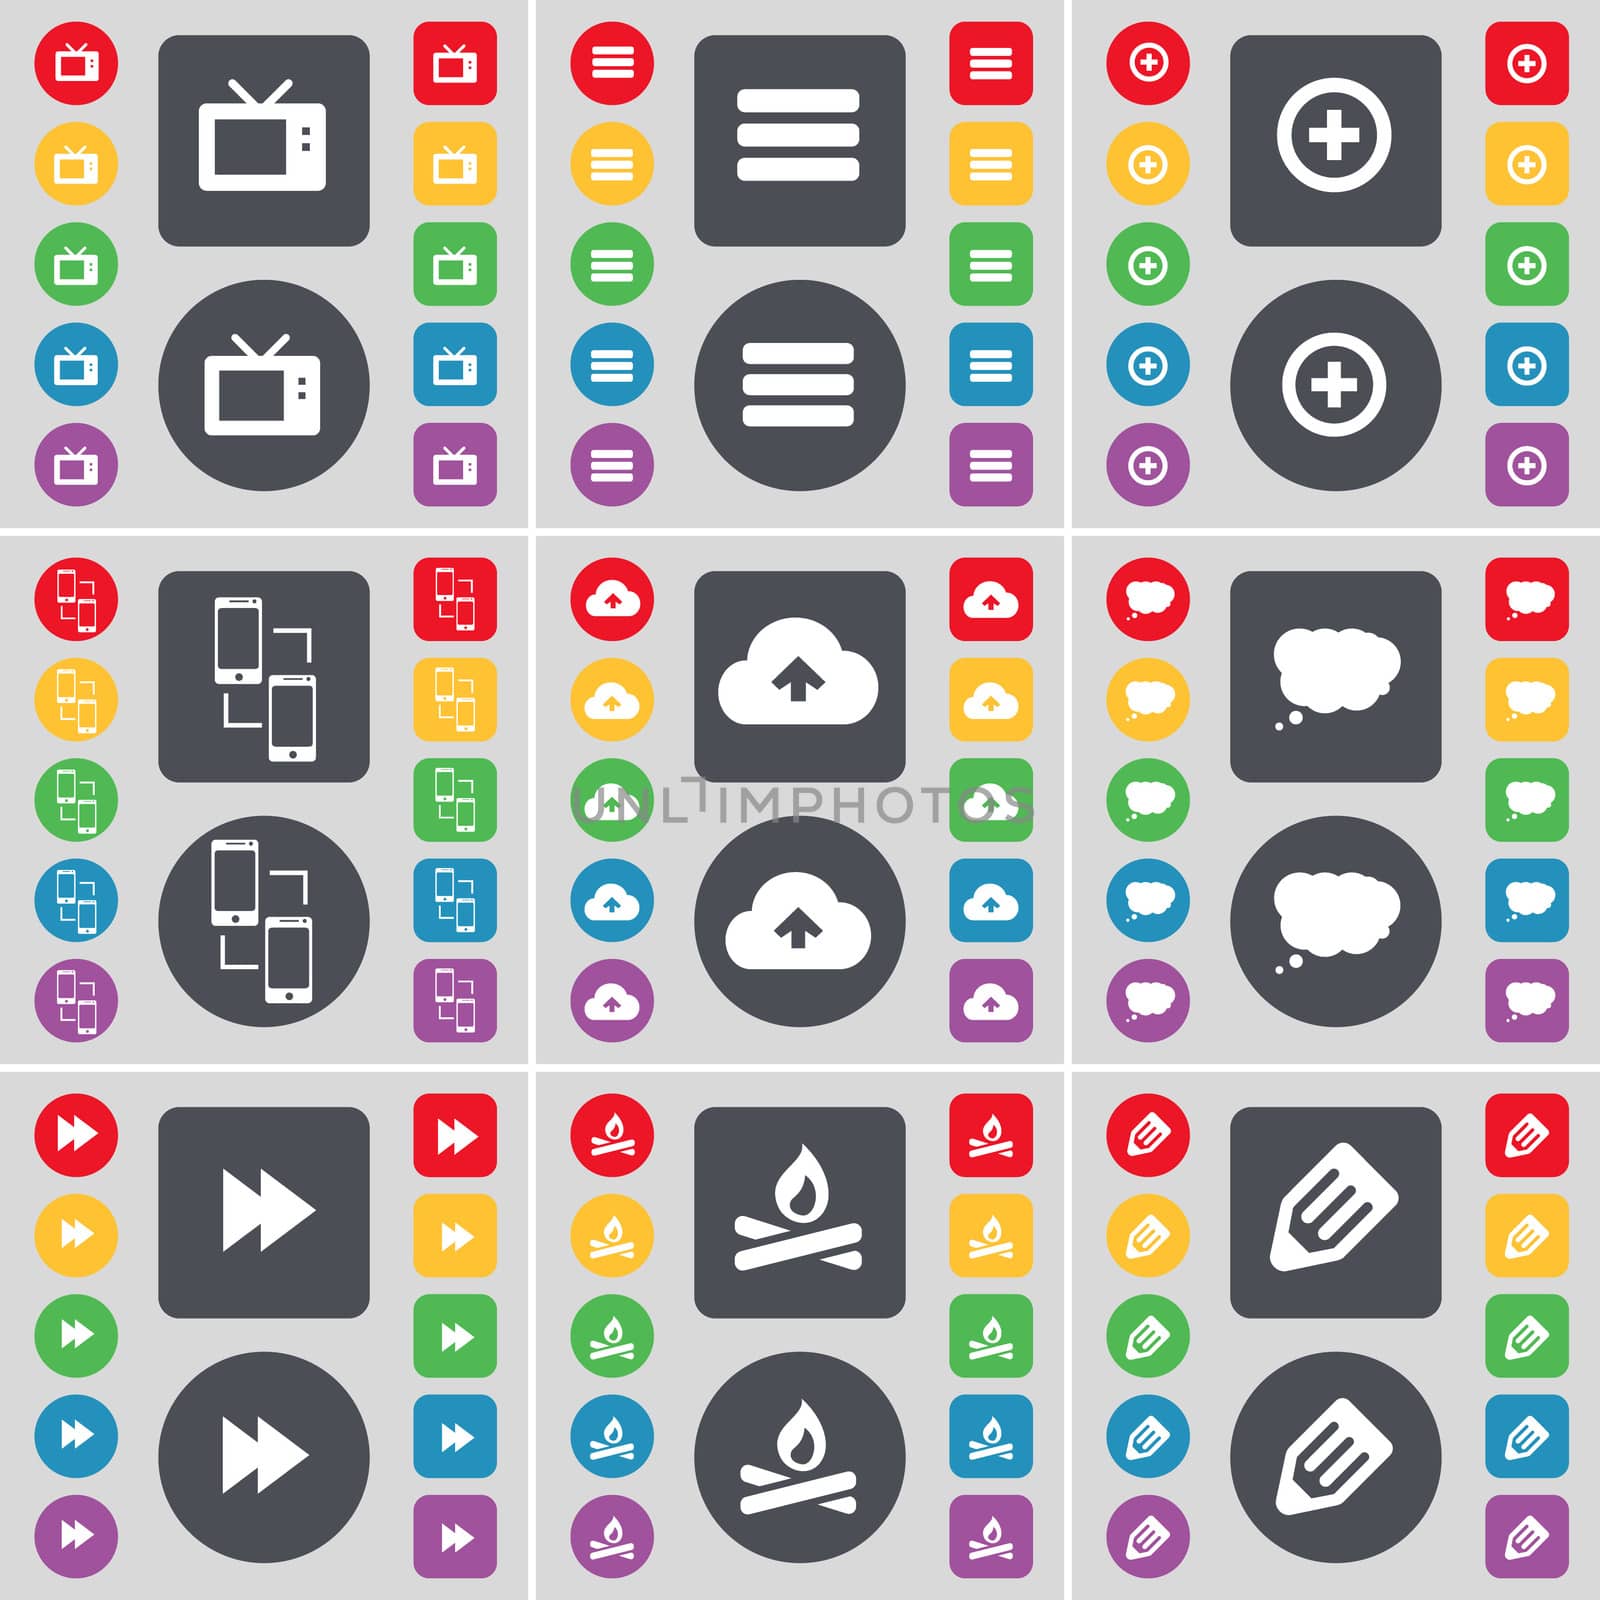 Retro TV, Apps, Plus, Information exchange, Cloud, Chat cloud, Rewind, Campfire, Pencil icon symbol. A large set of flat, colored buttons for your design.  by serhii_lohvyniuk